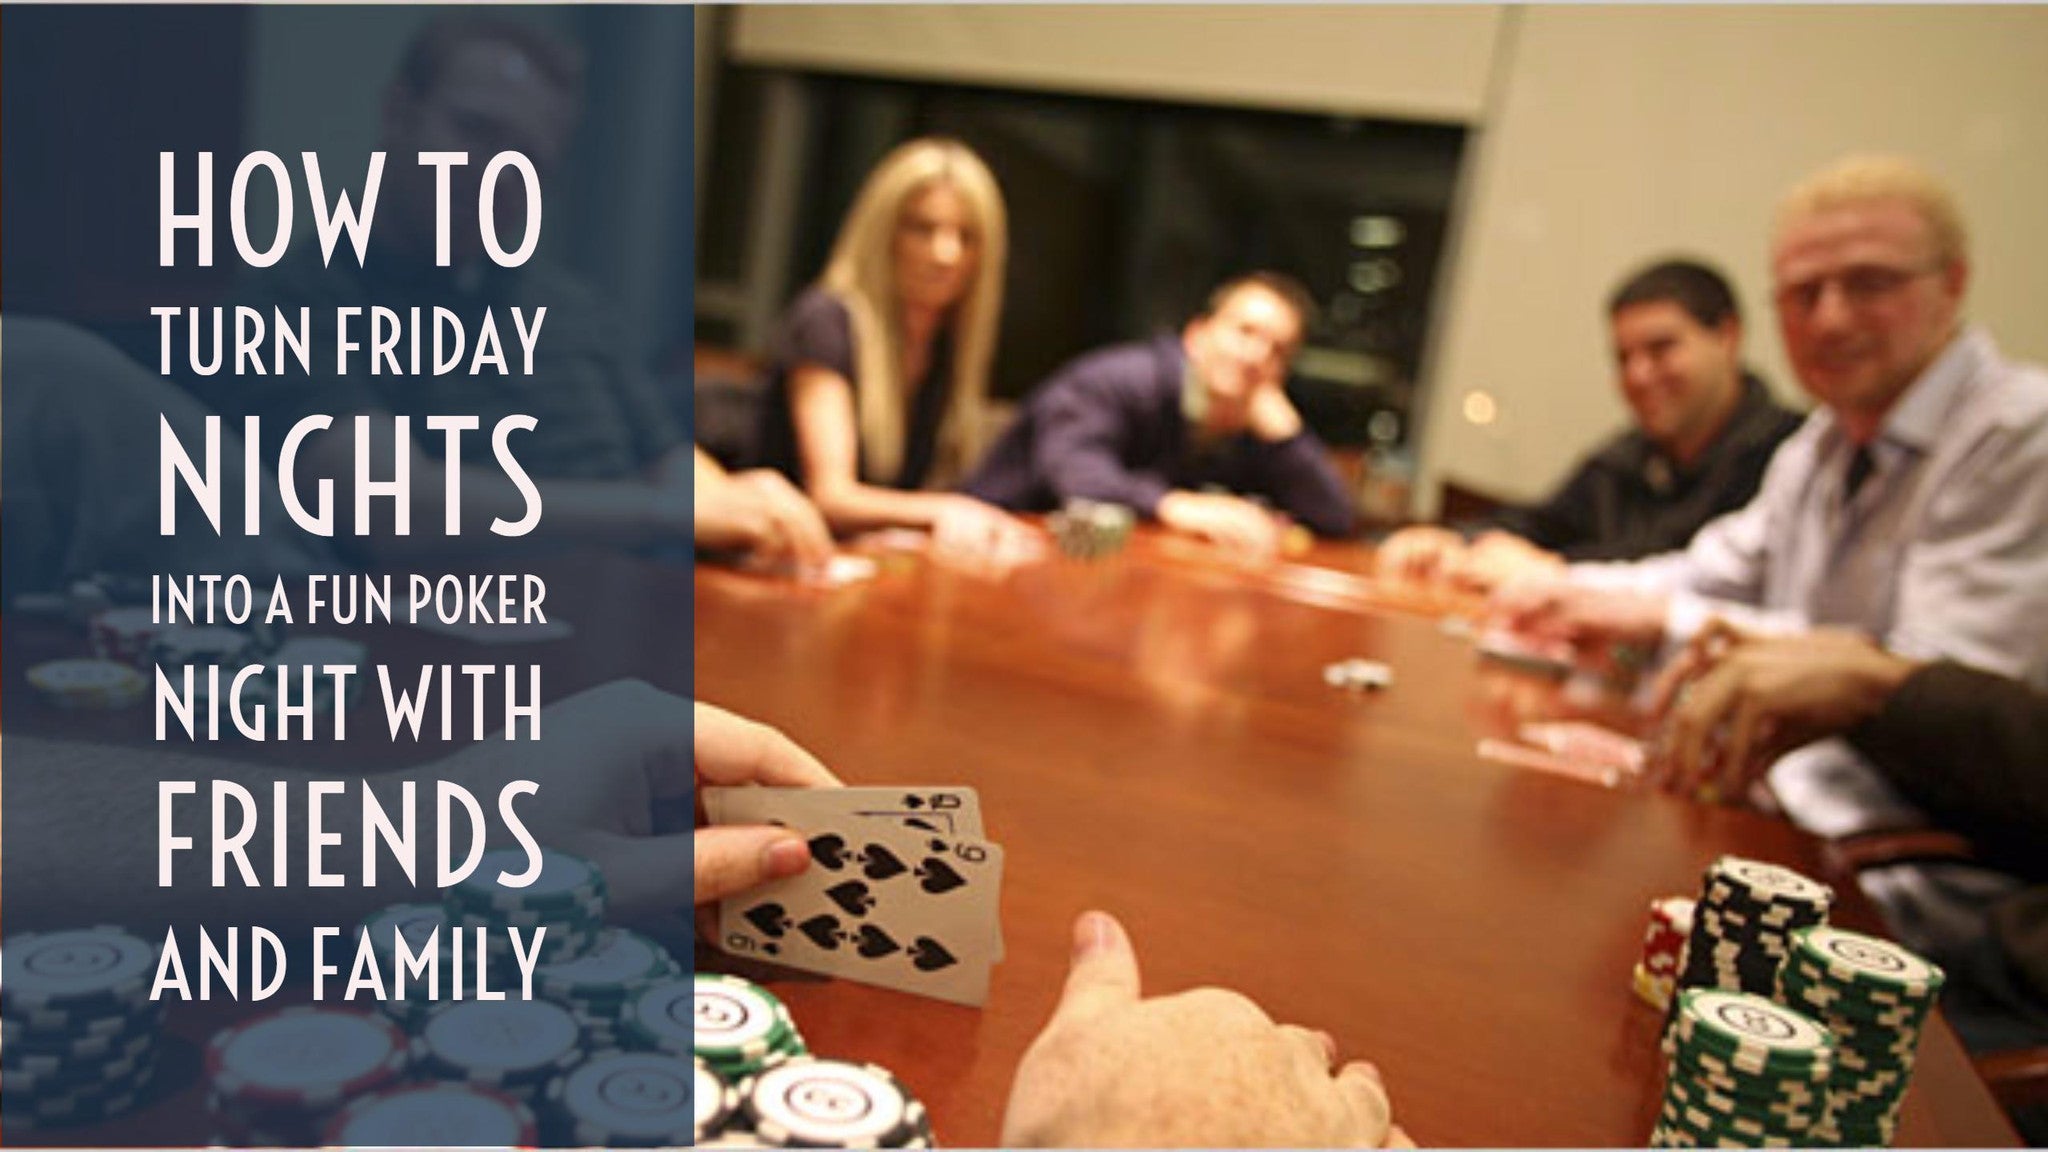 How to turn Friday nights into a fun poker night with friends and family